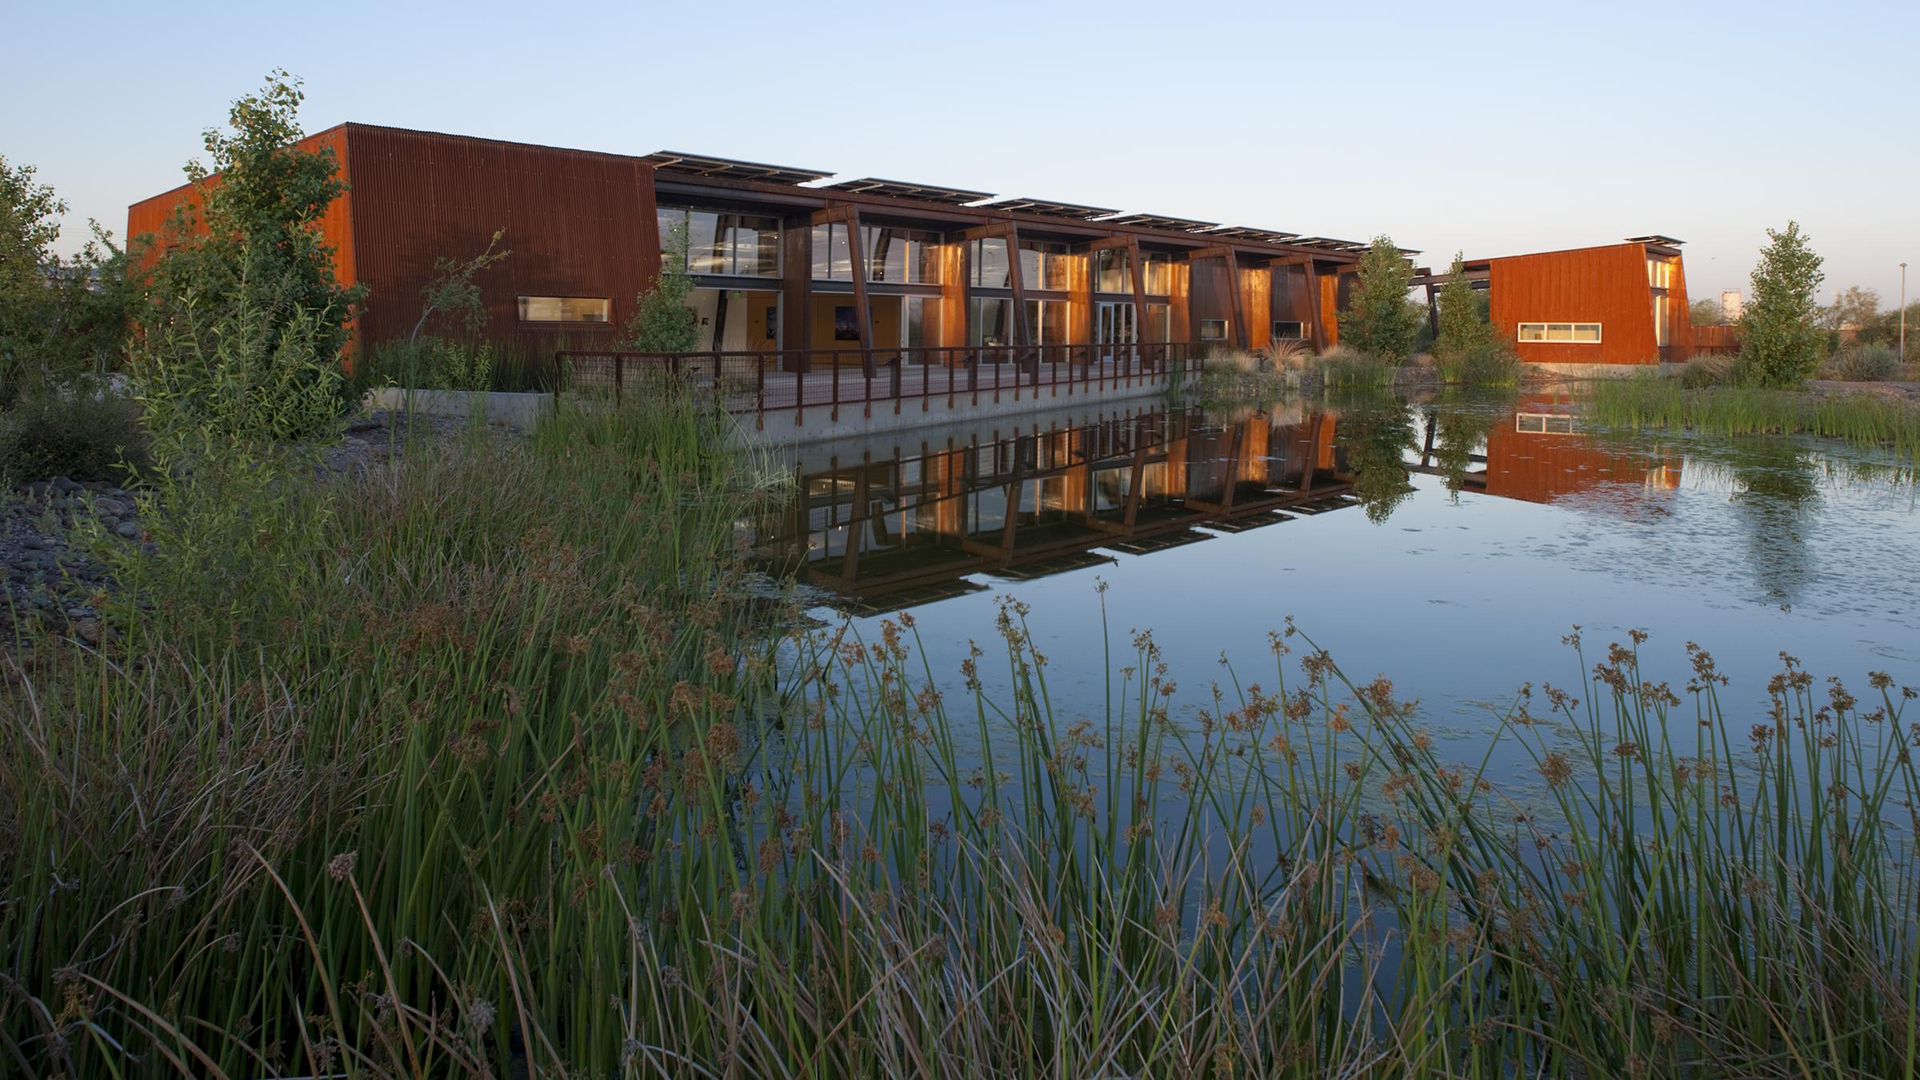 Water and tall grass in foreground of one story building at dusk